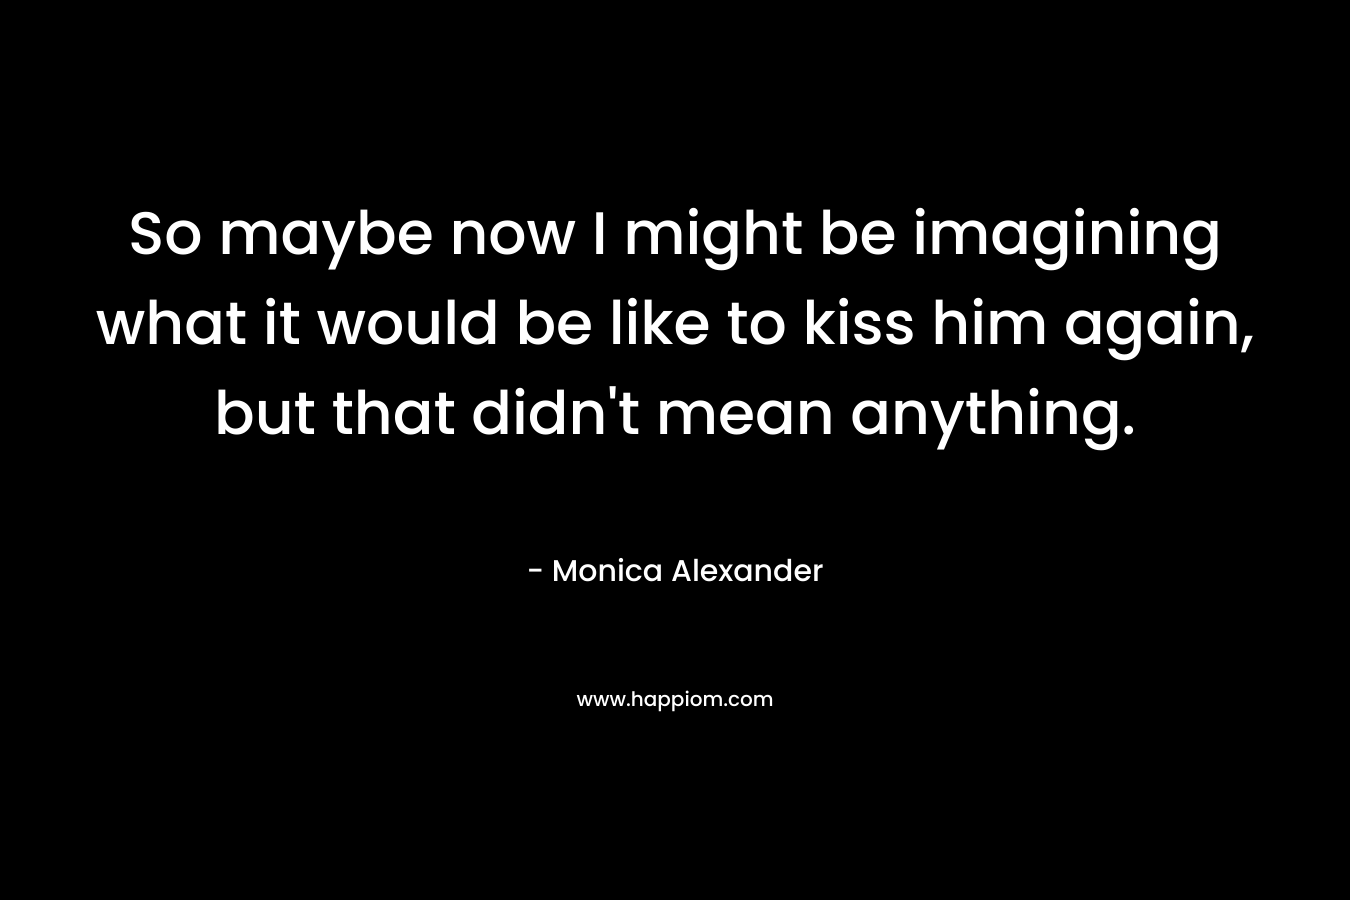 So maybe now I might be imagining what it would be like to kiss him again, but that didn’t mean anything. – Monica Alexander